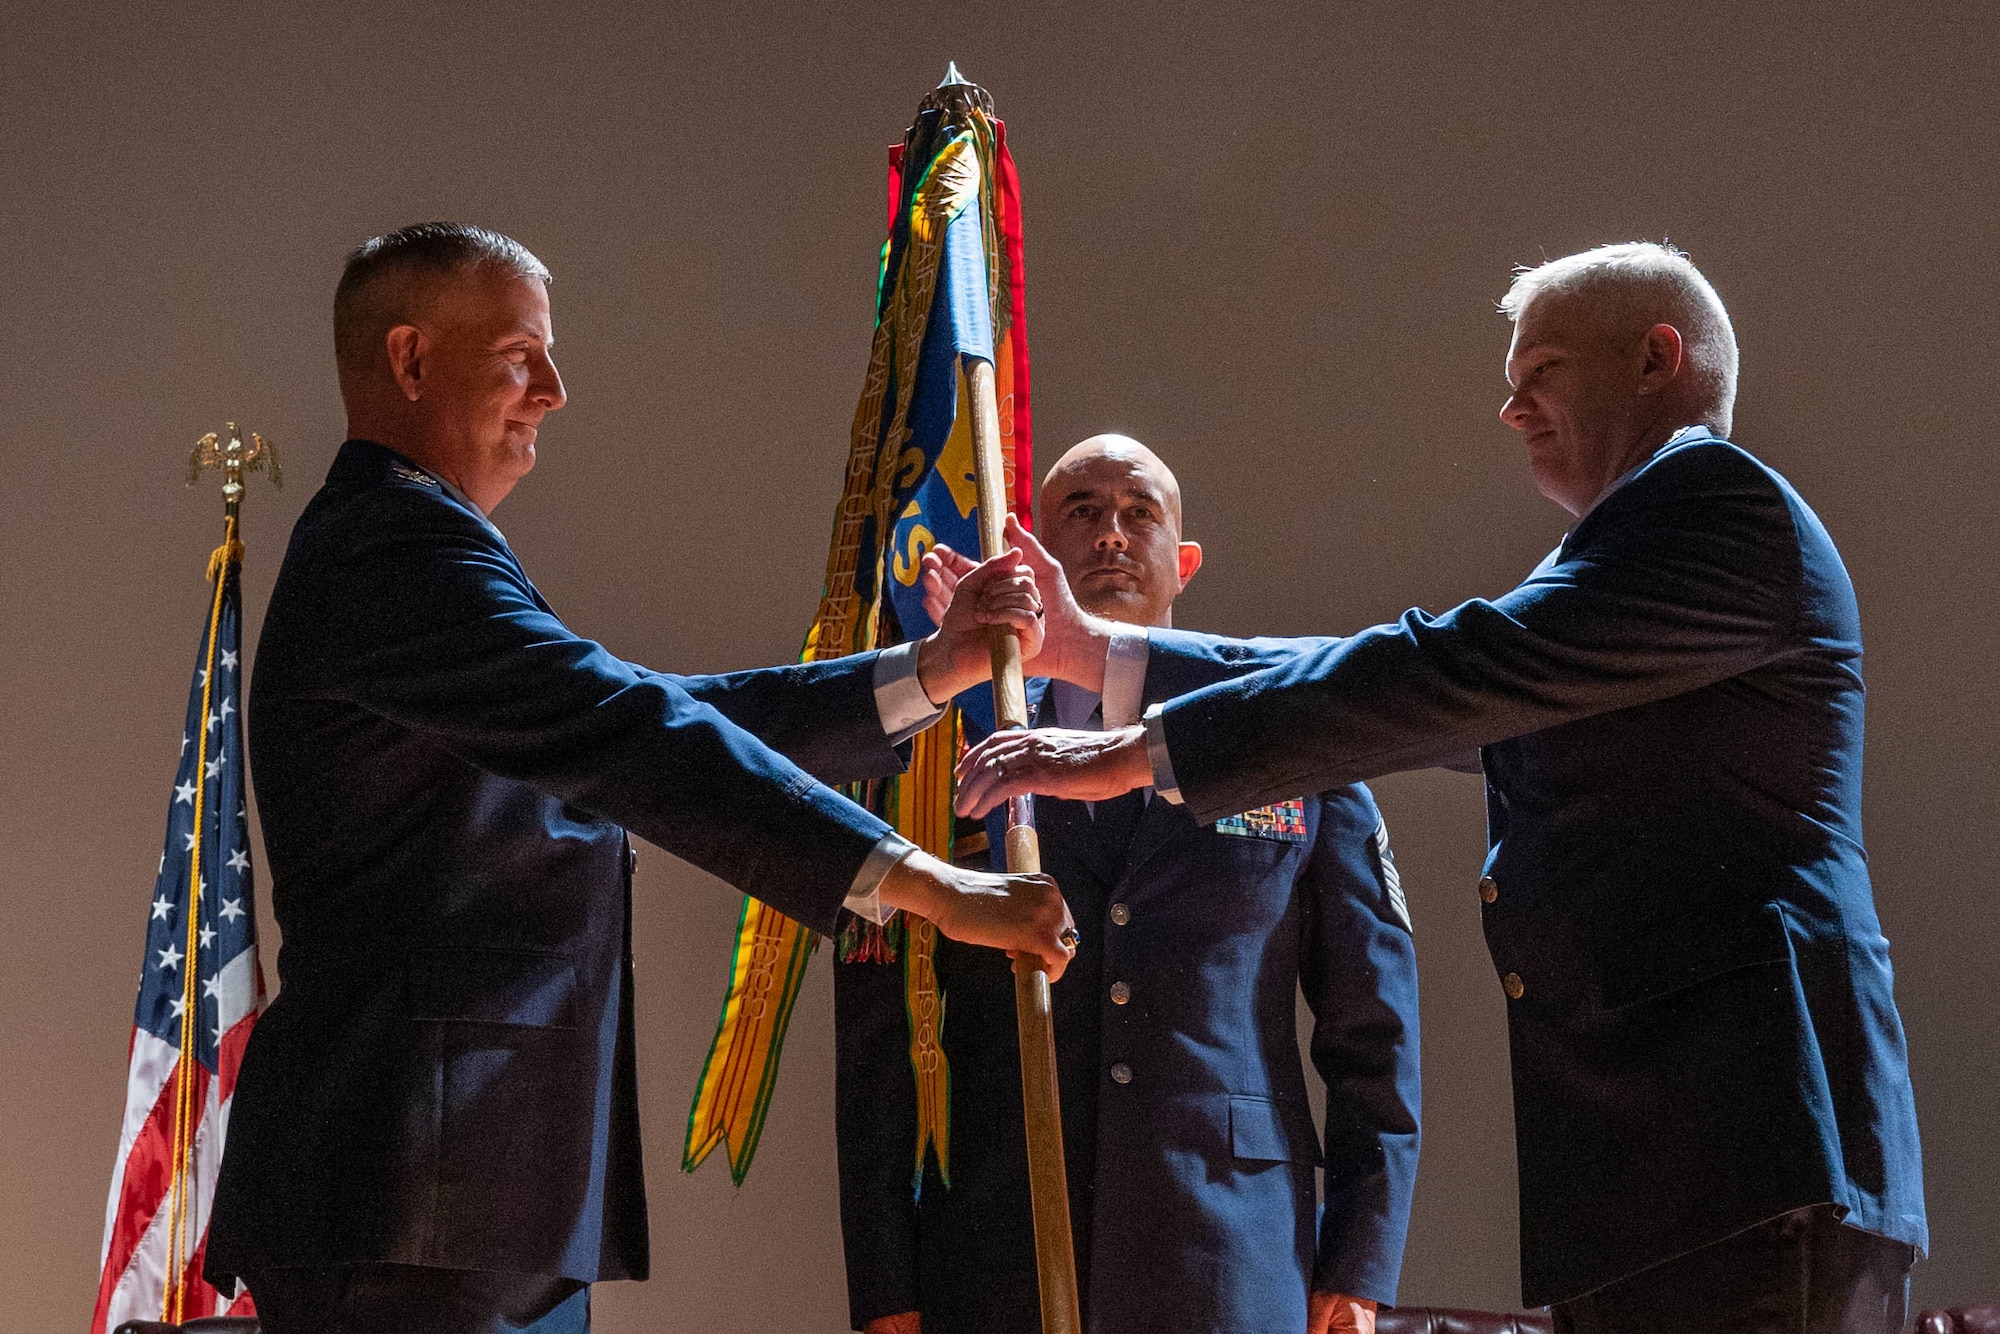 Lt. Col. Jason L. Brooks assumed command of the 315th Maintenance Squadron from the relinquishing commander, Lt. Col. Taylor Adams, at the base theater here, Jan 7th, 2023.

Col. Brett Newman, 315th Maintenance Group commander, officiated the ceremony and passed the unit guideon to Brooks.